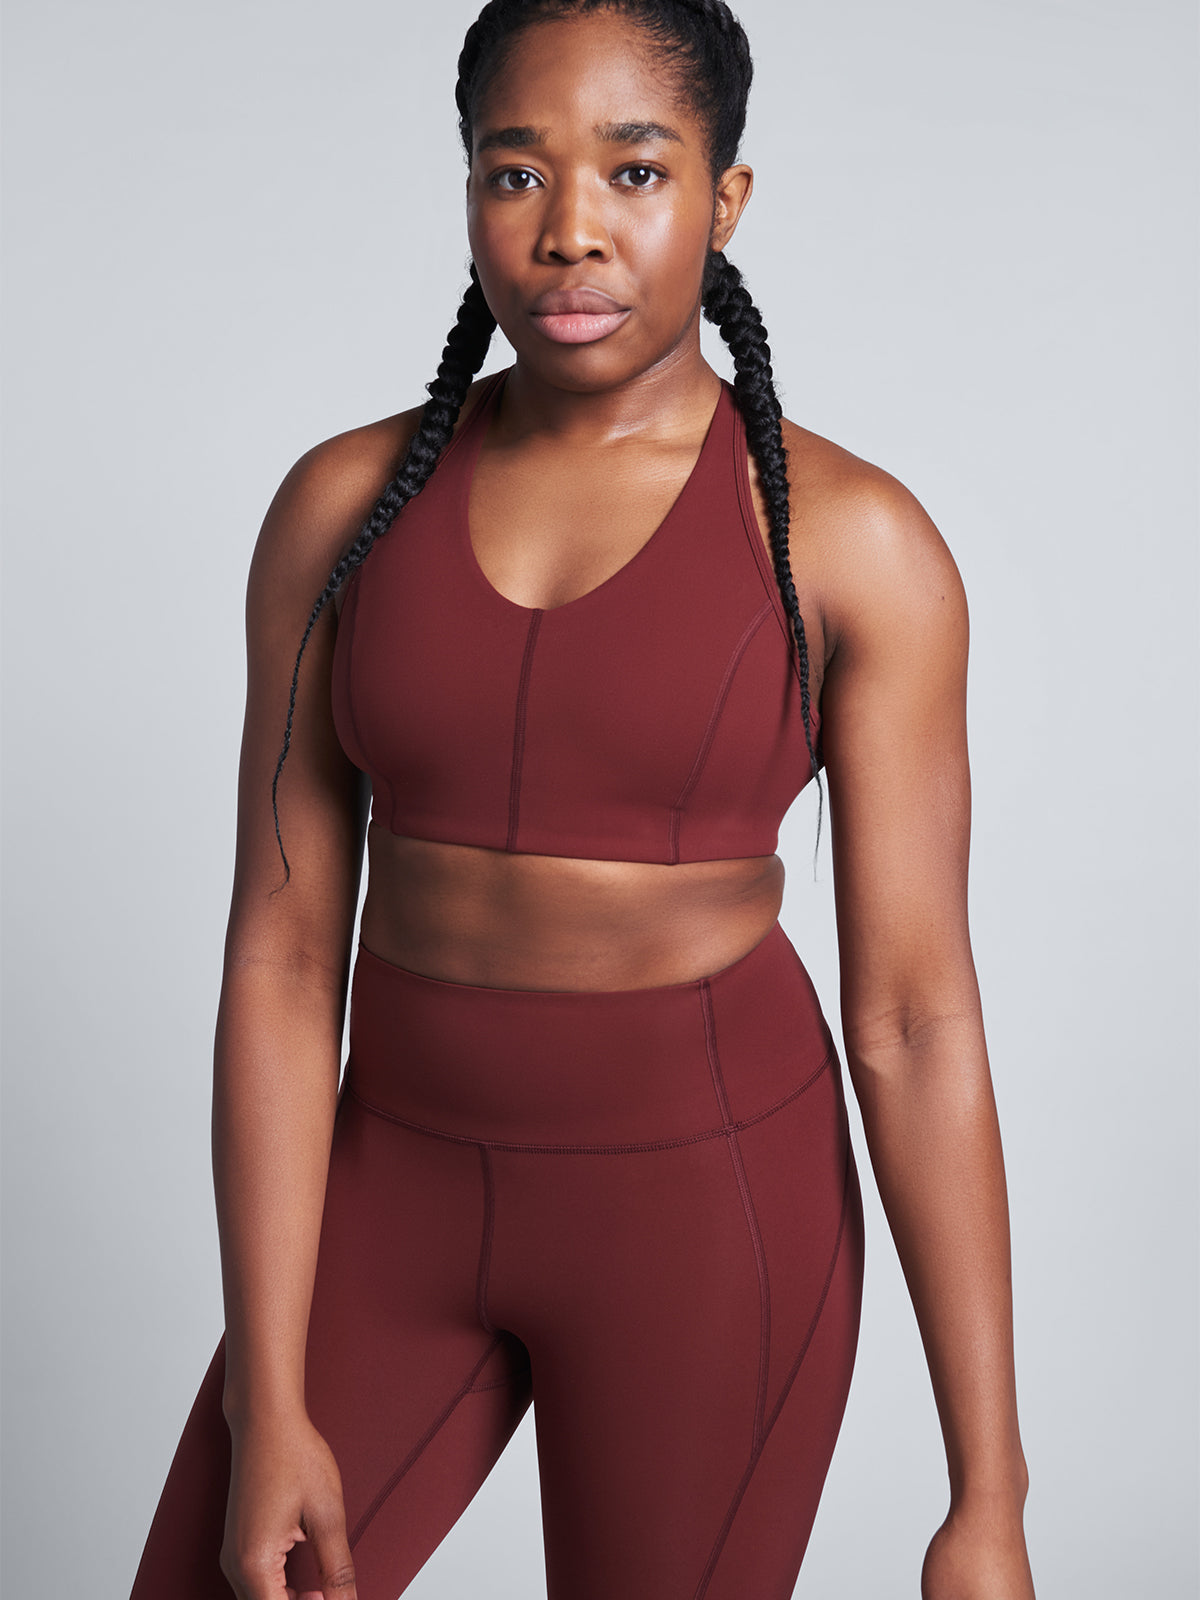 Buy Trendy Designer Sports Bras Online For Your Work Out - Lyon